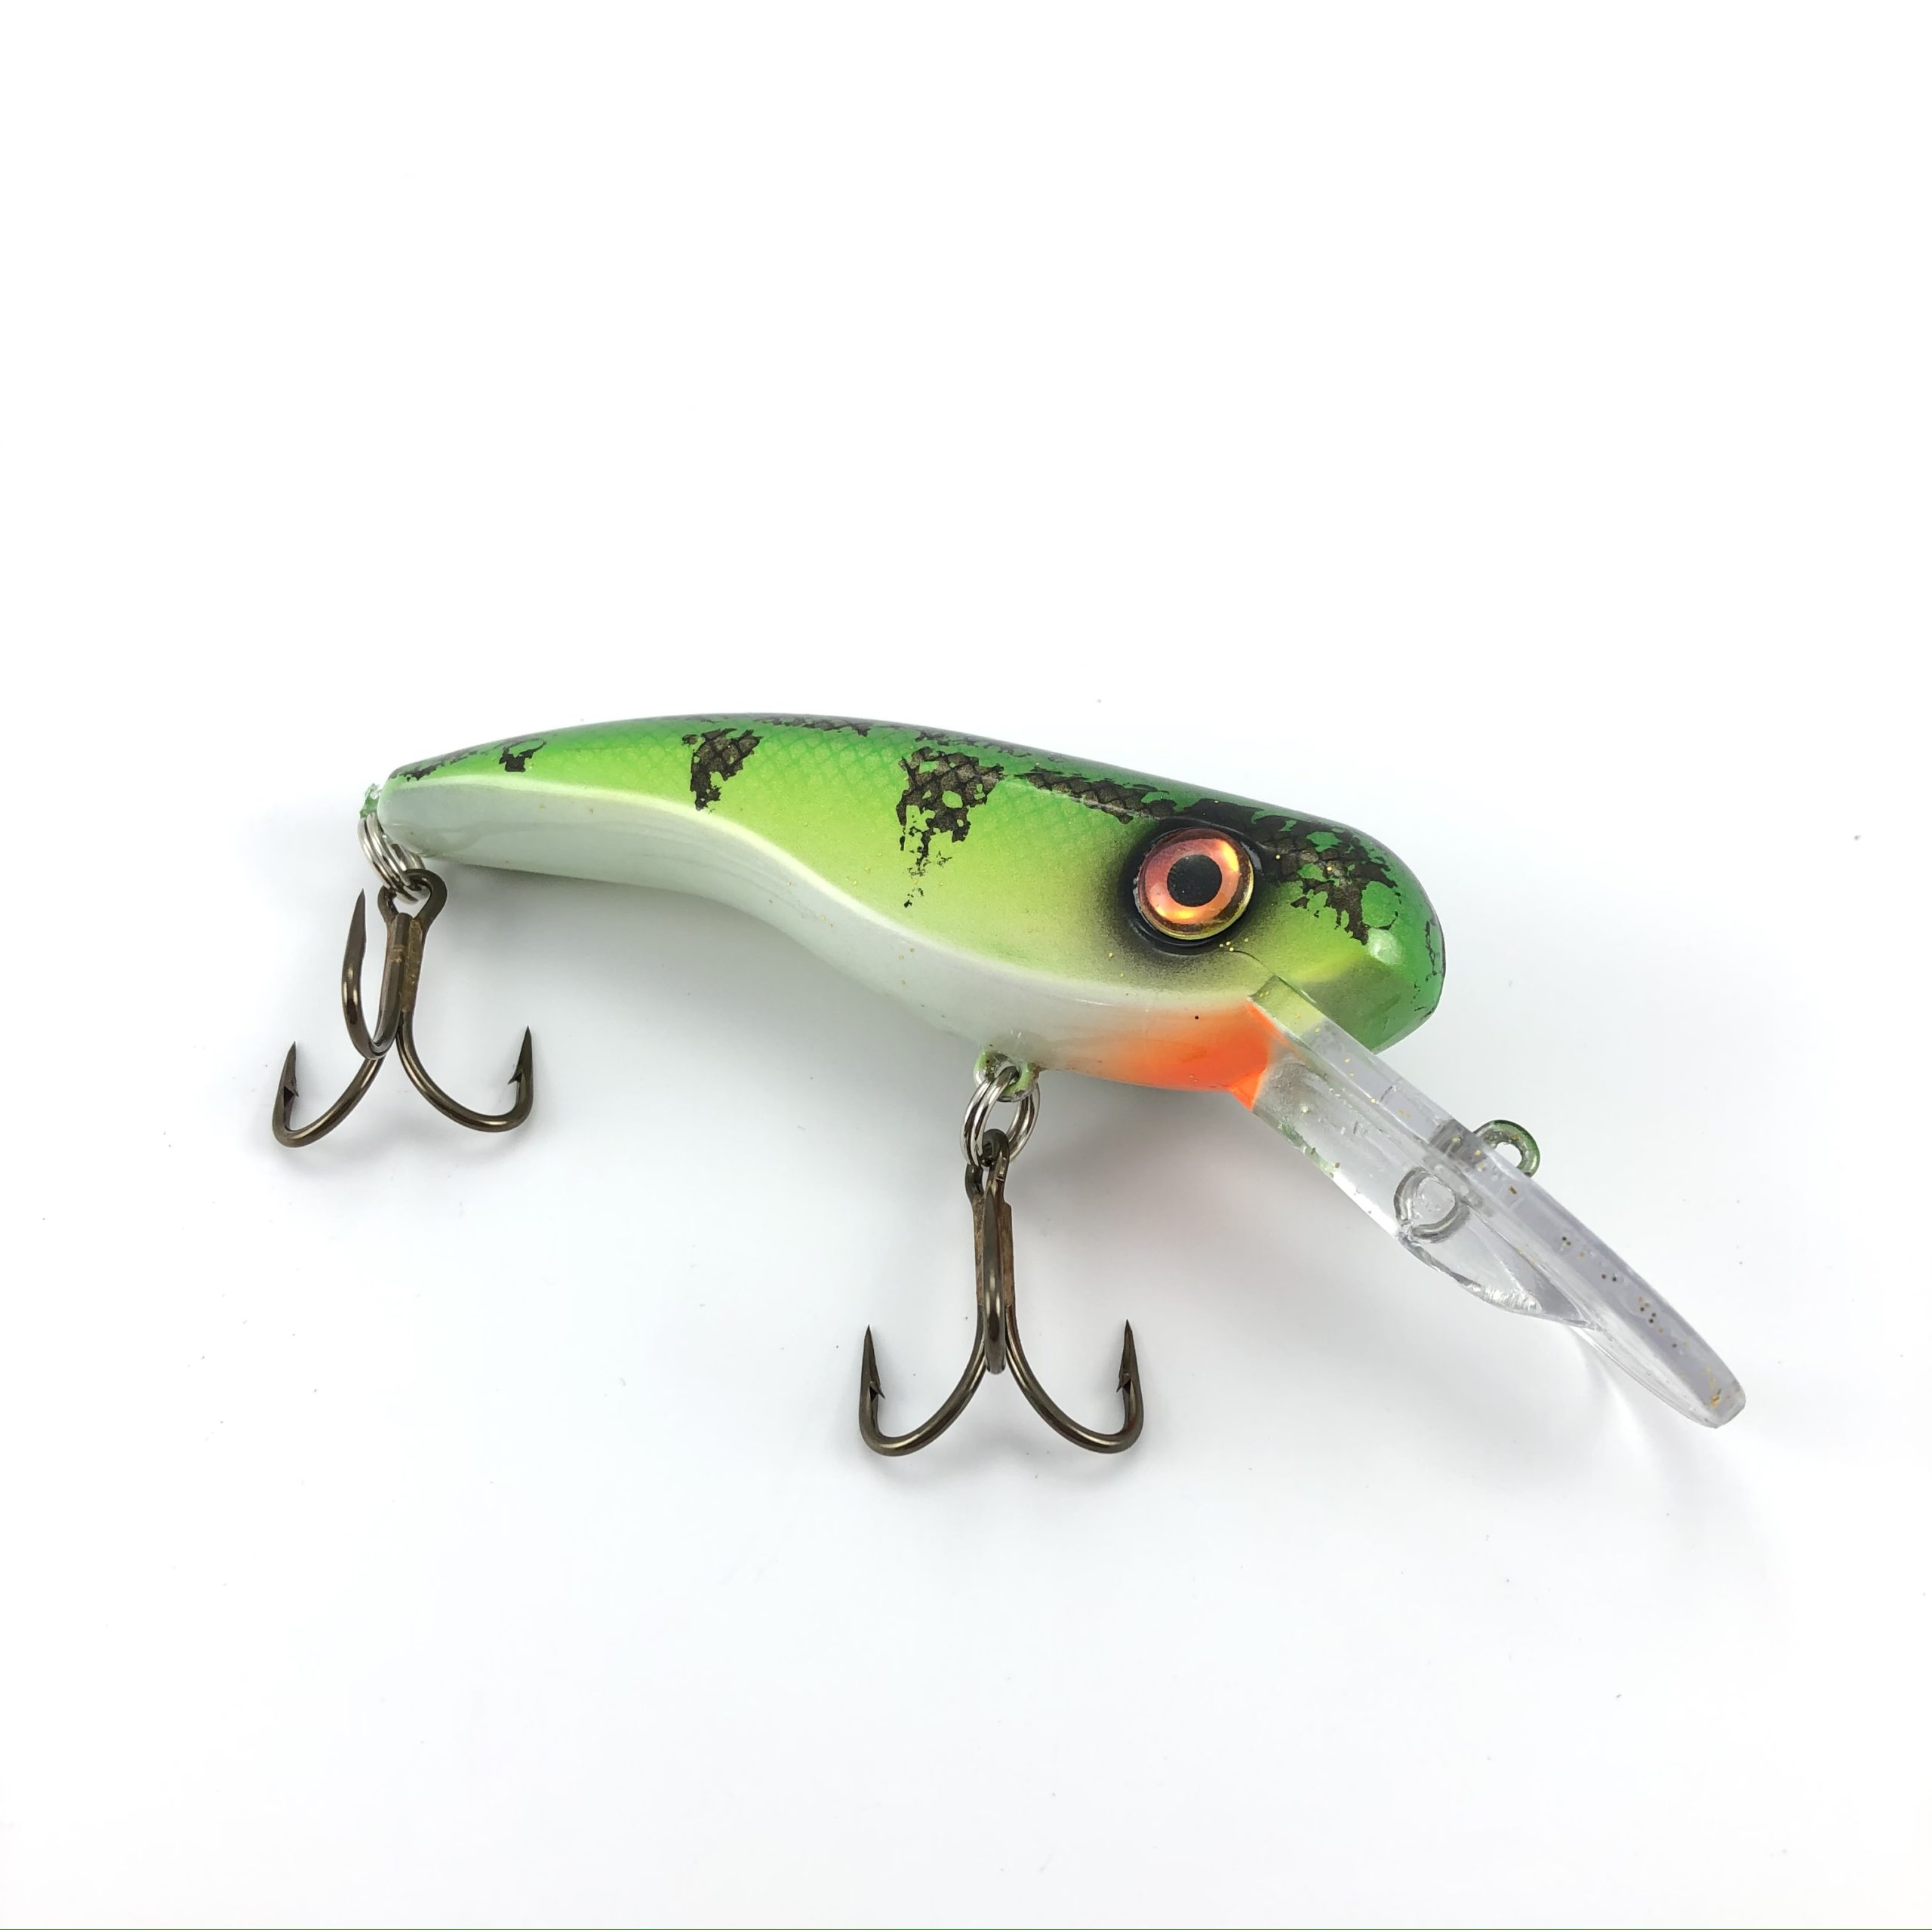 Musky/Pike Fishing TACKLE INDUSTRIES 10" MEDUSA TOP Water in M9 BABY DUCK